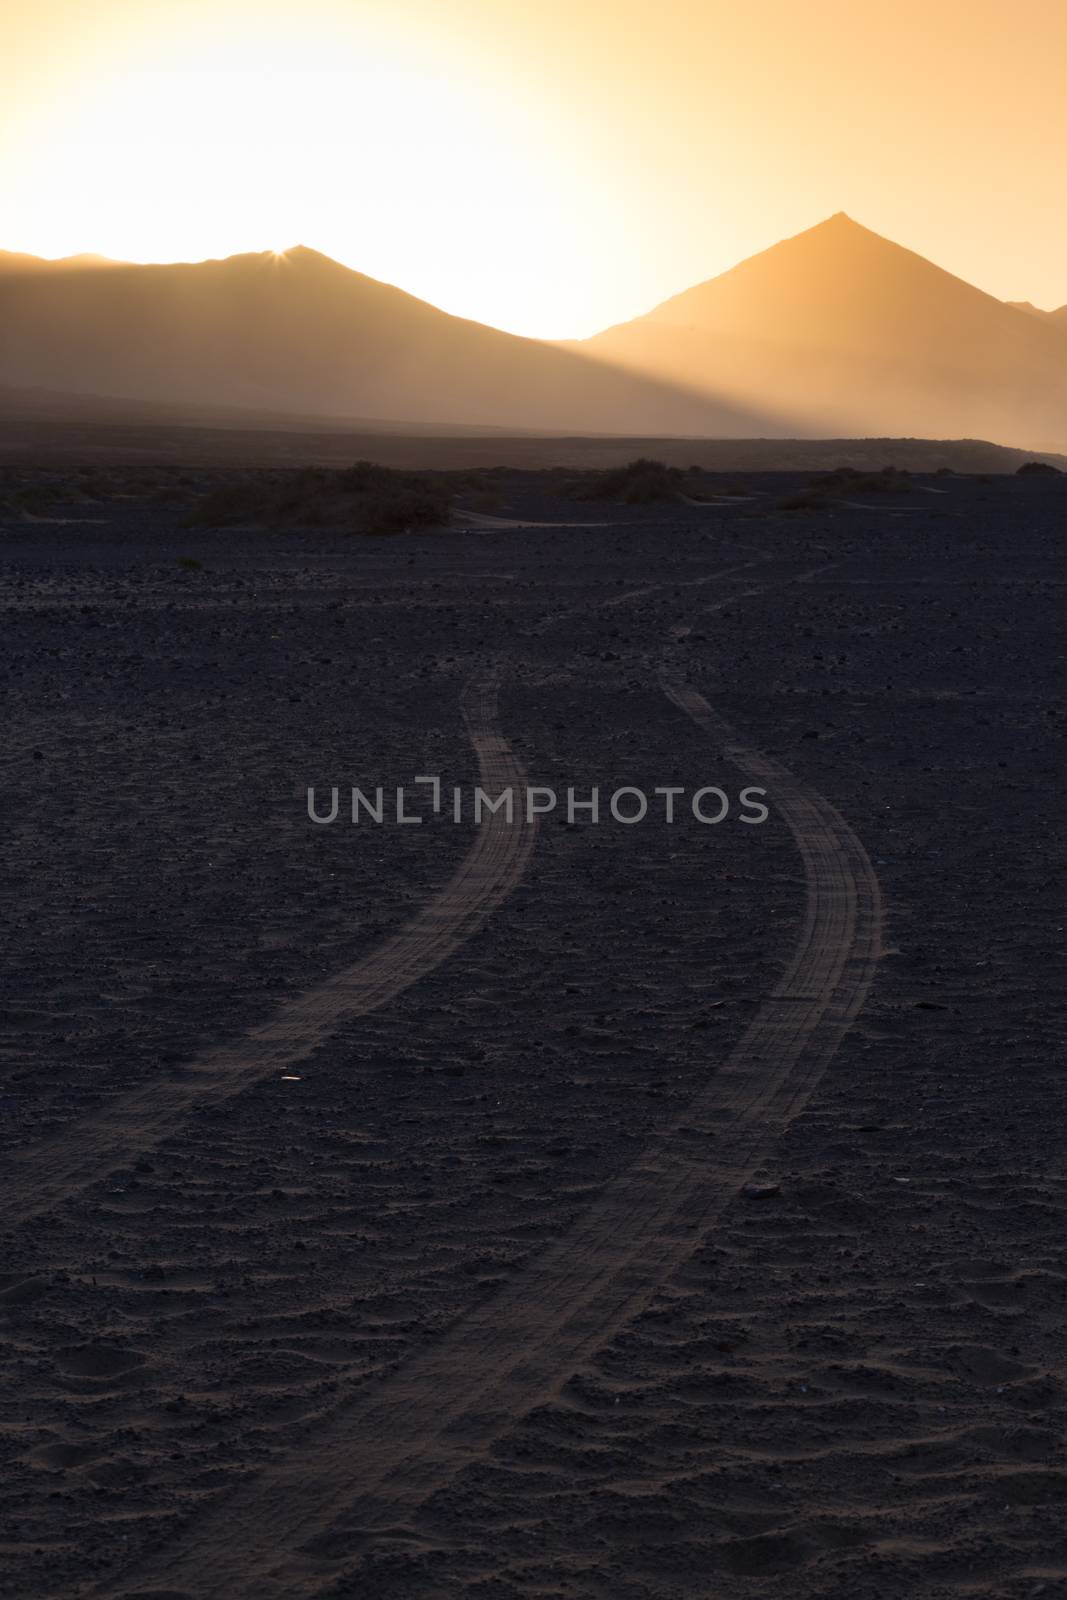 Wheel tracks in sand and dramatic landscape. by kasto